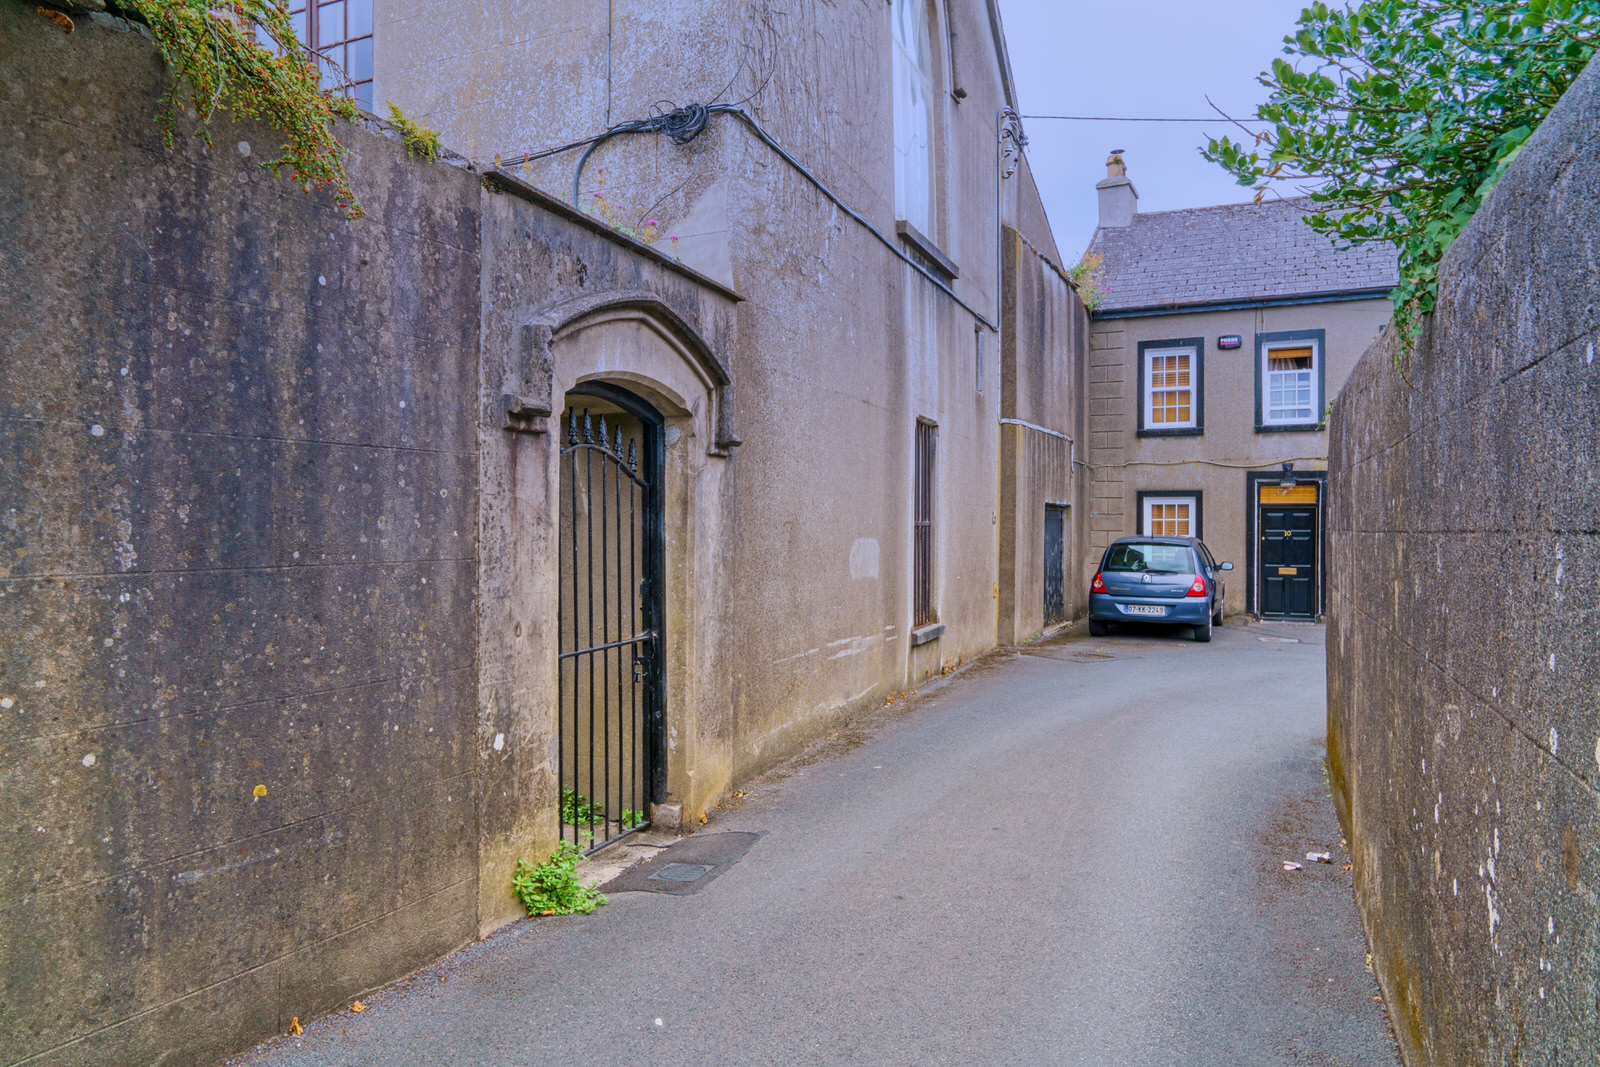 IN 2018 I EXPLORED A NARROW LANE NETWORK IN KILKENNY [DEAN STREET TO BUTT'S GREEN]-234273-1